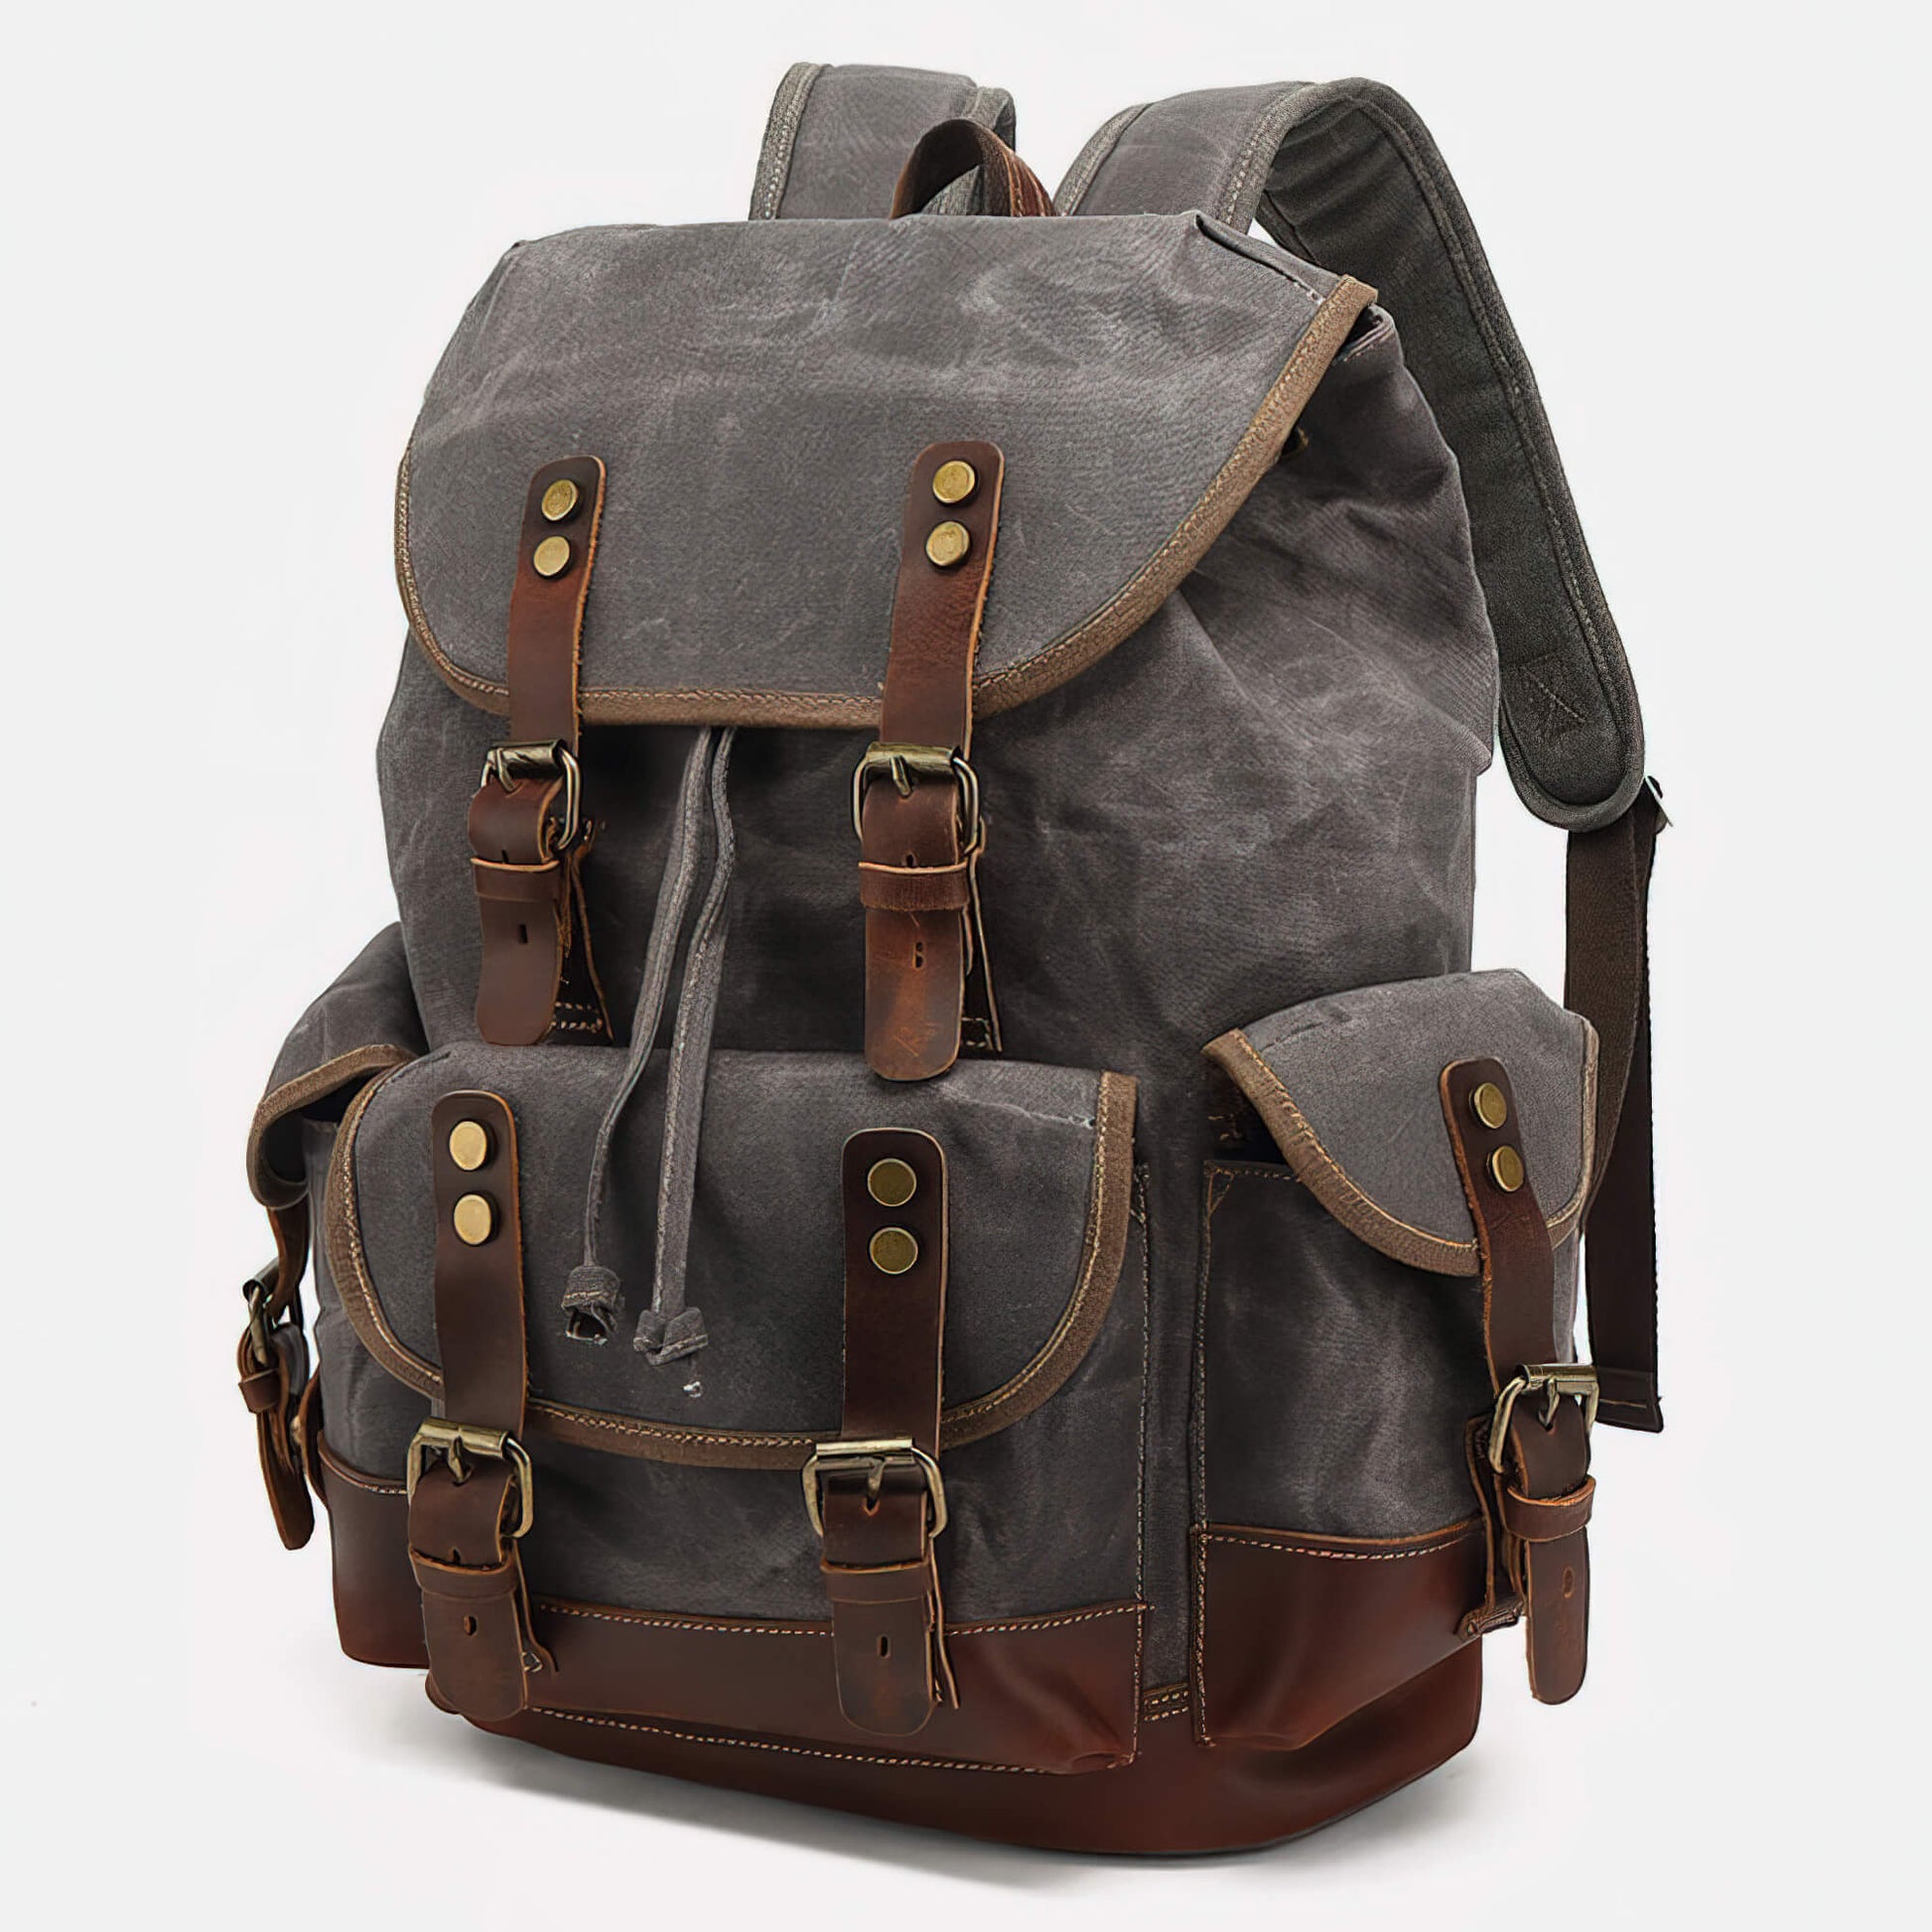 Leather Backpack in Black